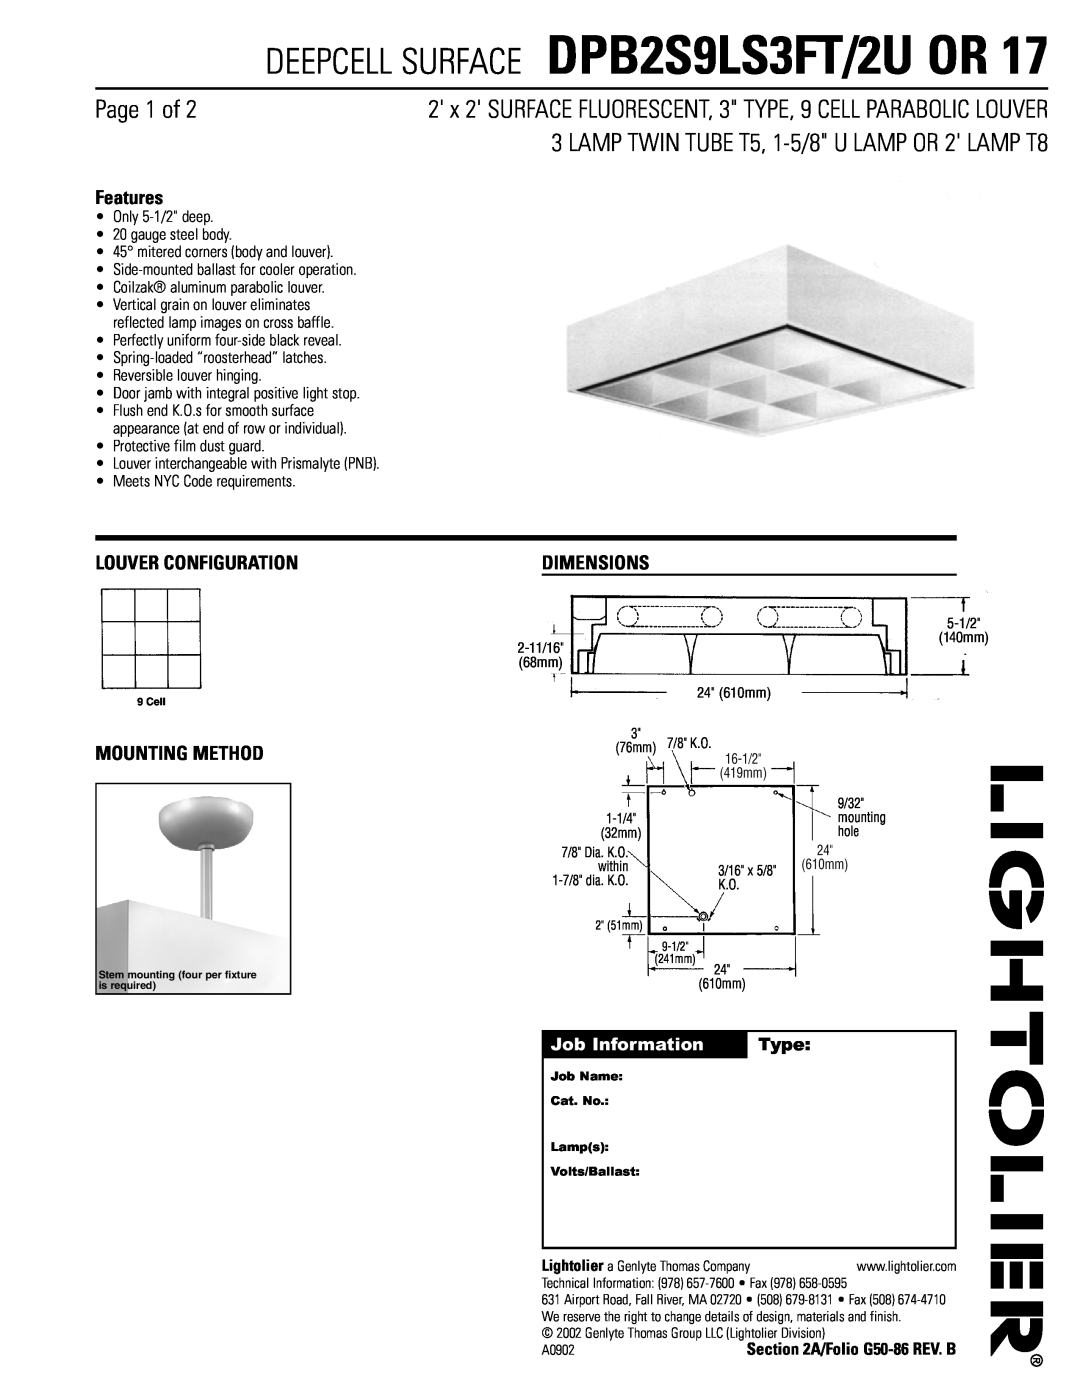 Lightolier dimensions DEEPCELL SURFACE DPB2S9LS3FT/2U OR, Page 1 of, LAMP TWIN TUBE T5, 1-5/8U LAMP OR 2 LAMP T8, Type 